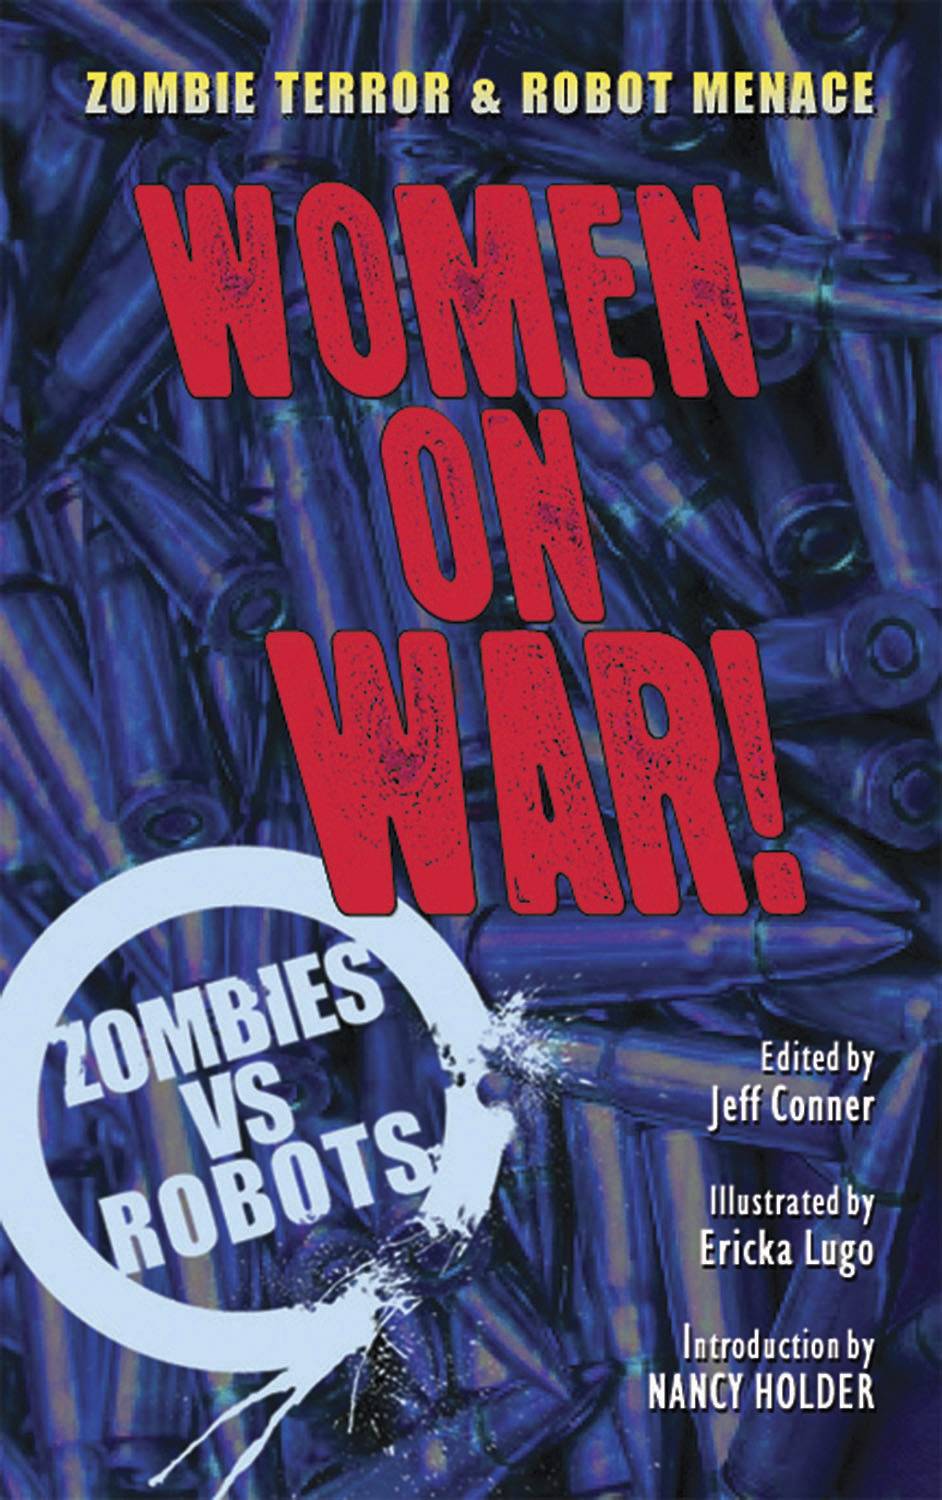 Zombies vs Robots Women On War Prose Softcover